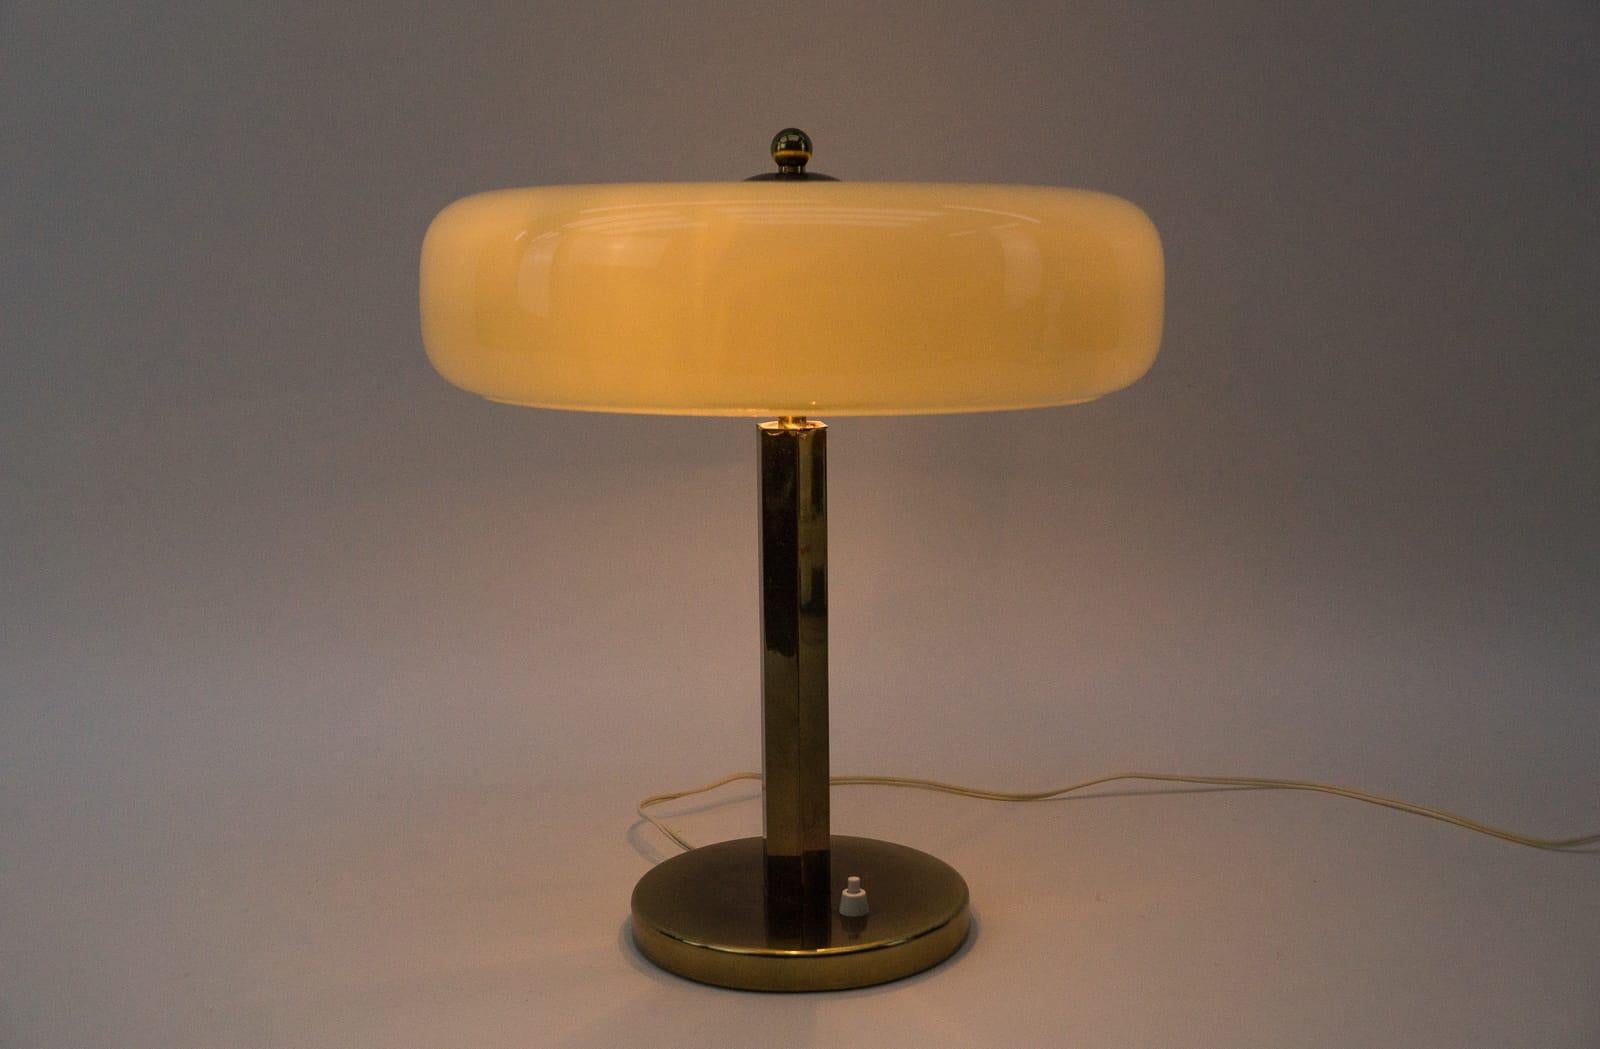 Exceptional and elegant Mid-Century Modern brass table lamp.

Executed in massive brass, the lamp comes with 2 x E27 / E26 Edison screw fit bulb sockets, is wired, in working condition and runs both on 110 / 230 volt.

Good original vintage